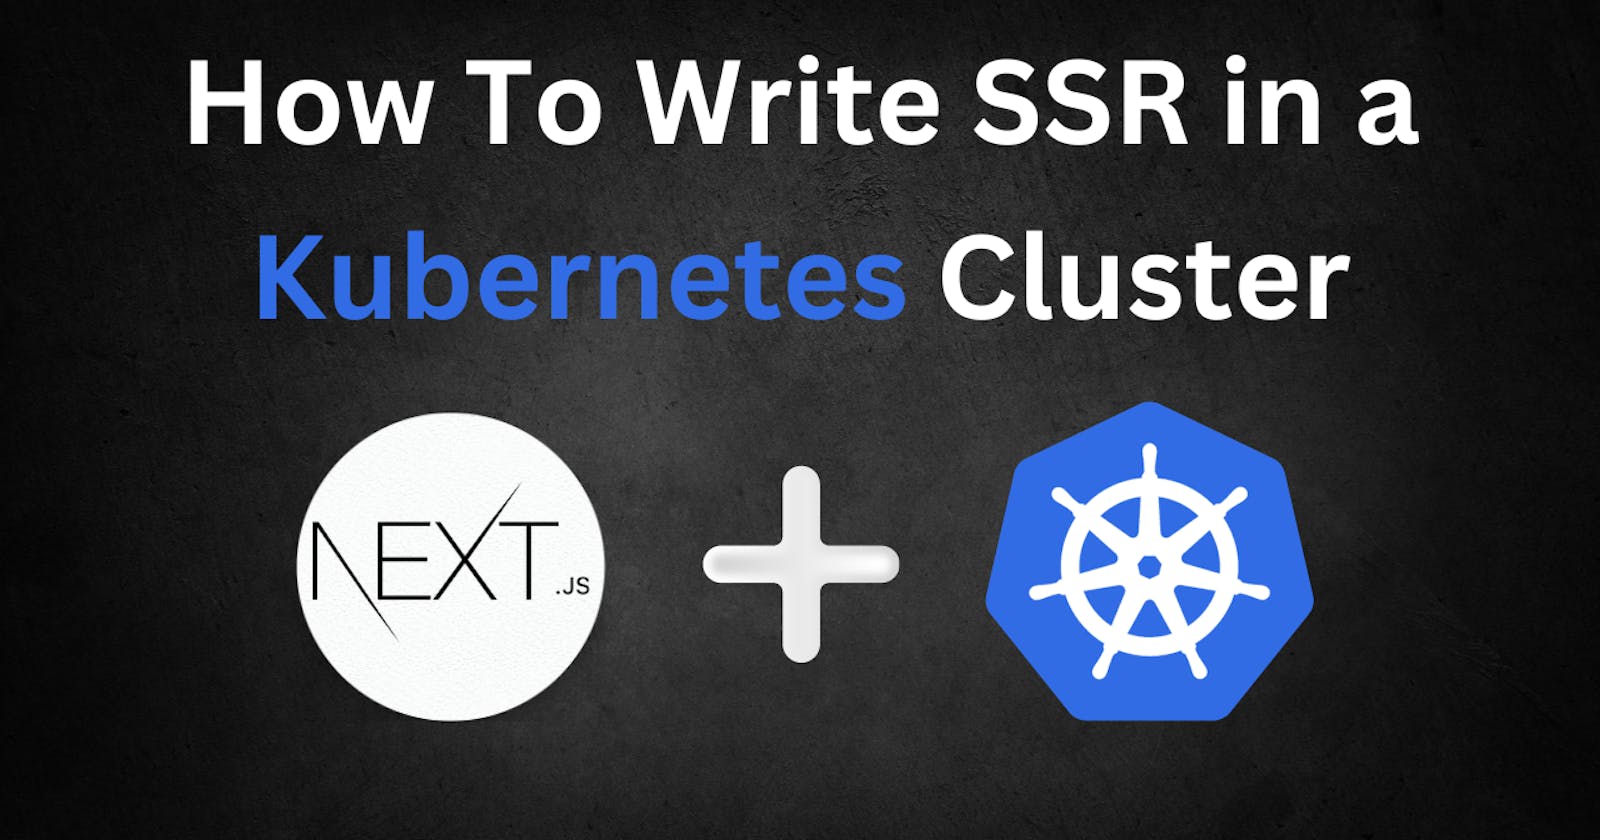 How To Write SSR in a Kubernetes Cluster? - Next.js as Example